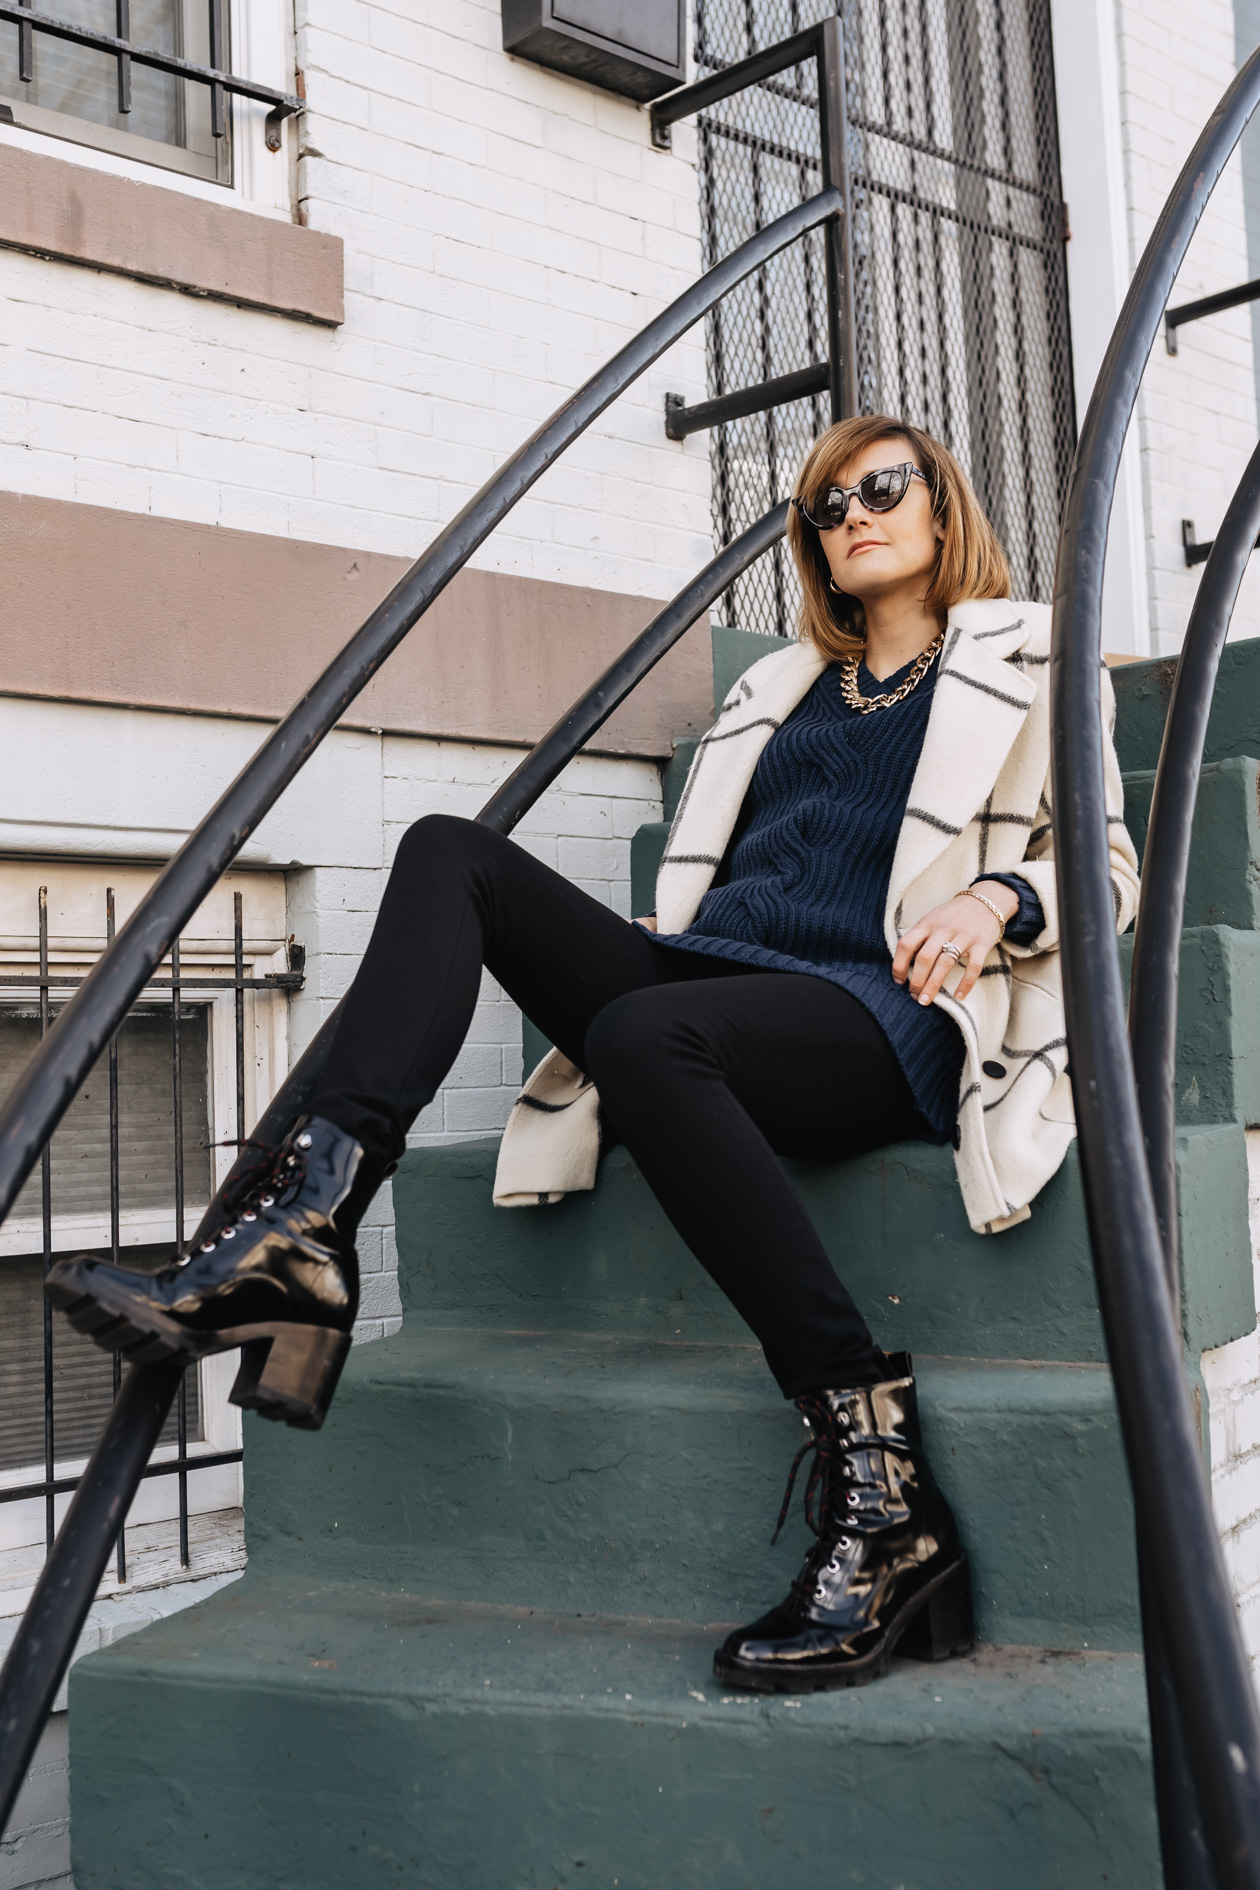 an easy winter uniform: a fun coat and combat boots - District of Chic